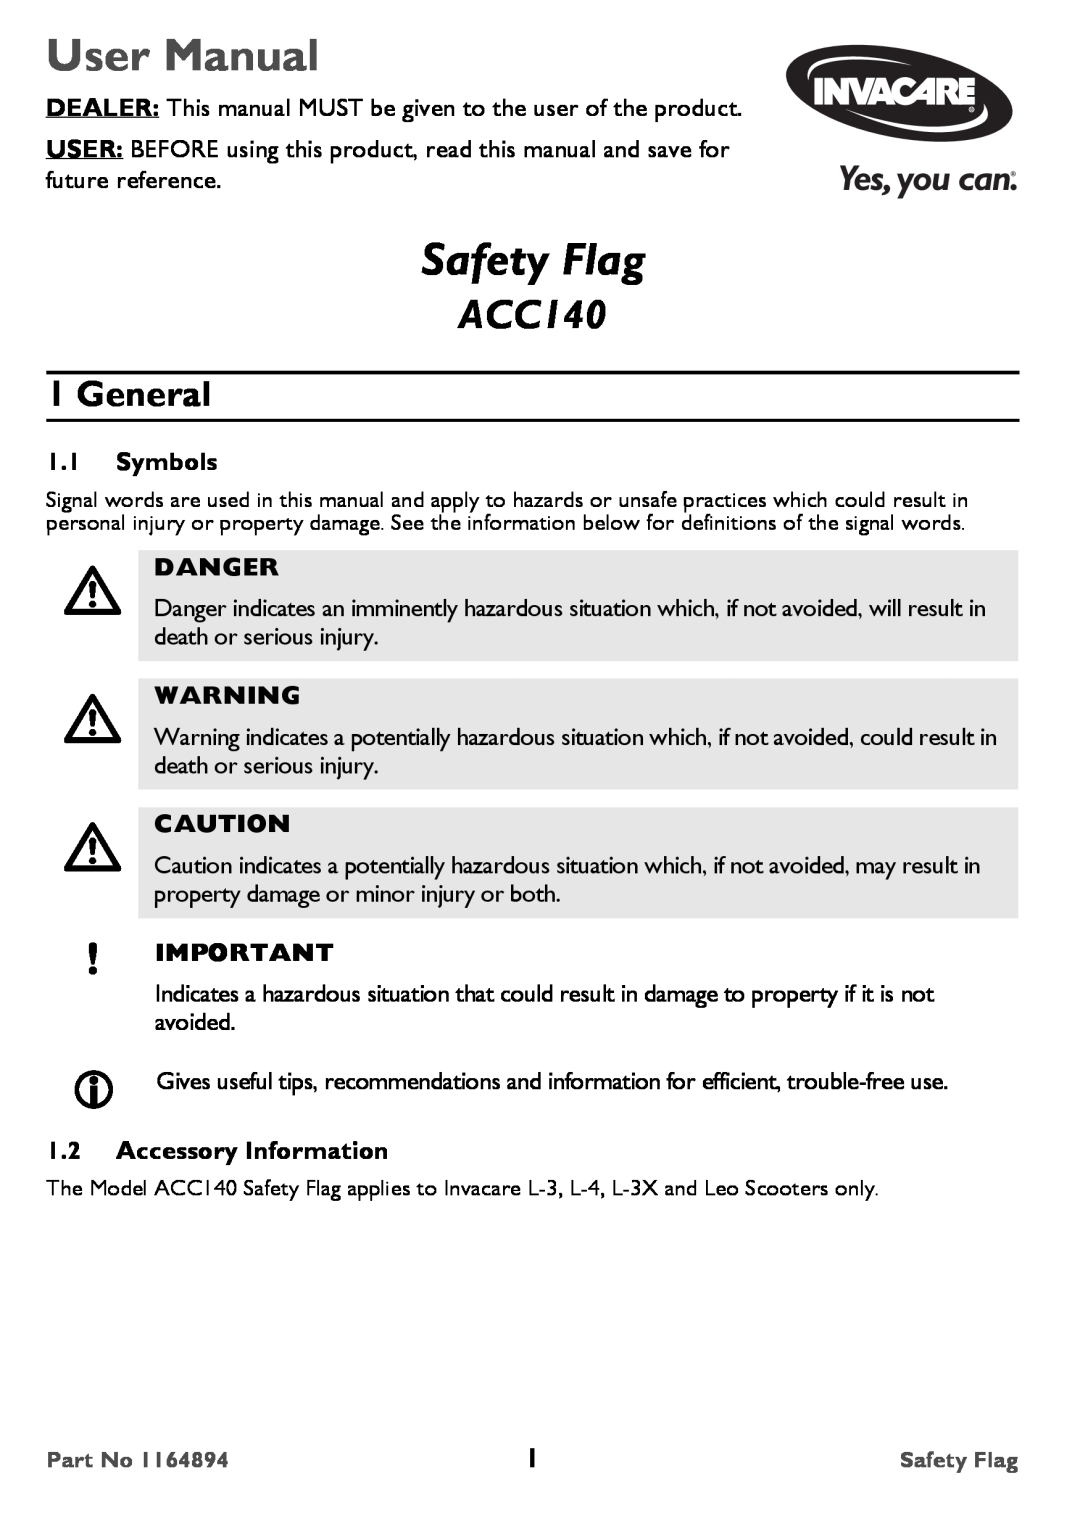 Invacare ACC140 user manual General, Symbols, Danger, Accessory Information, User Manual, Safety Flag 